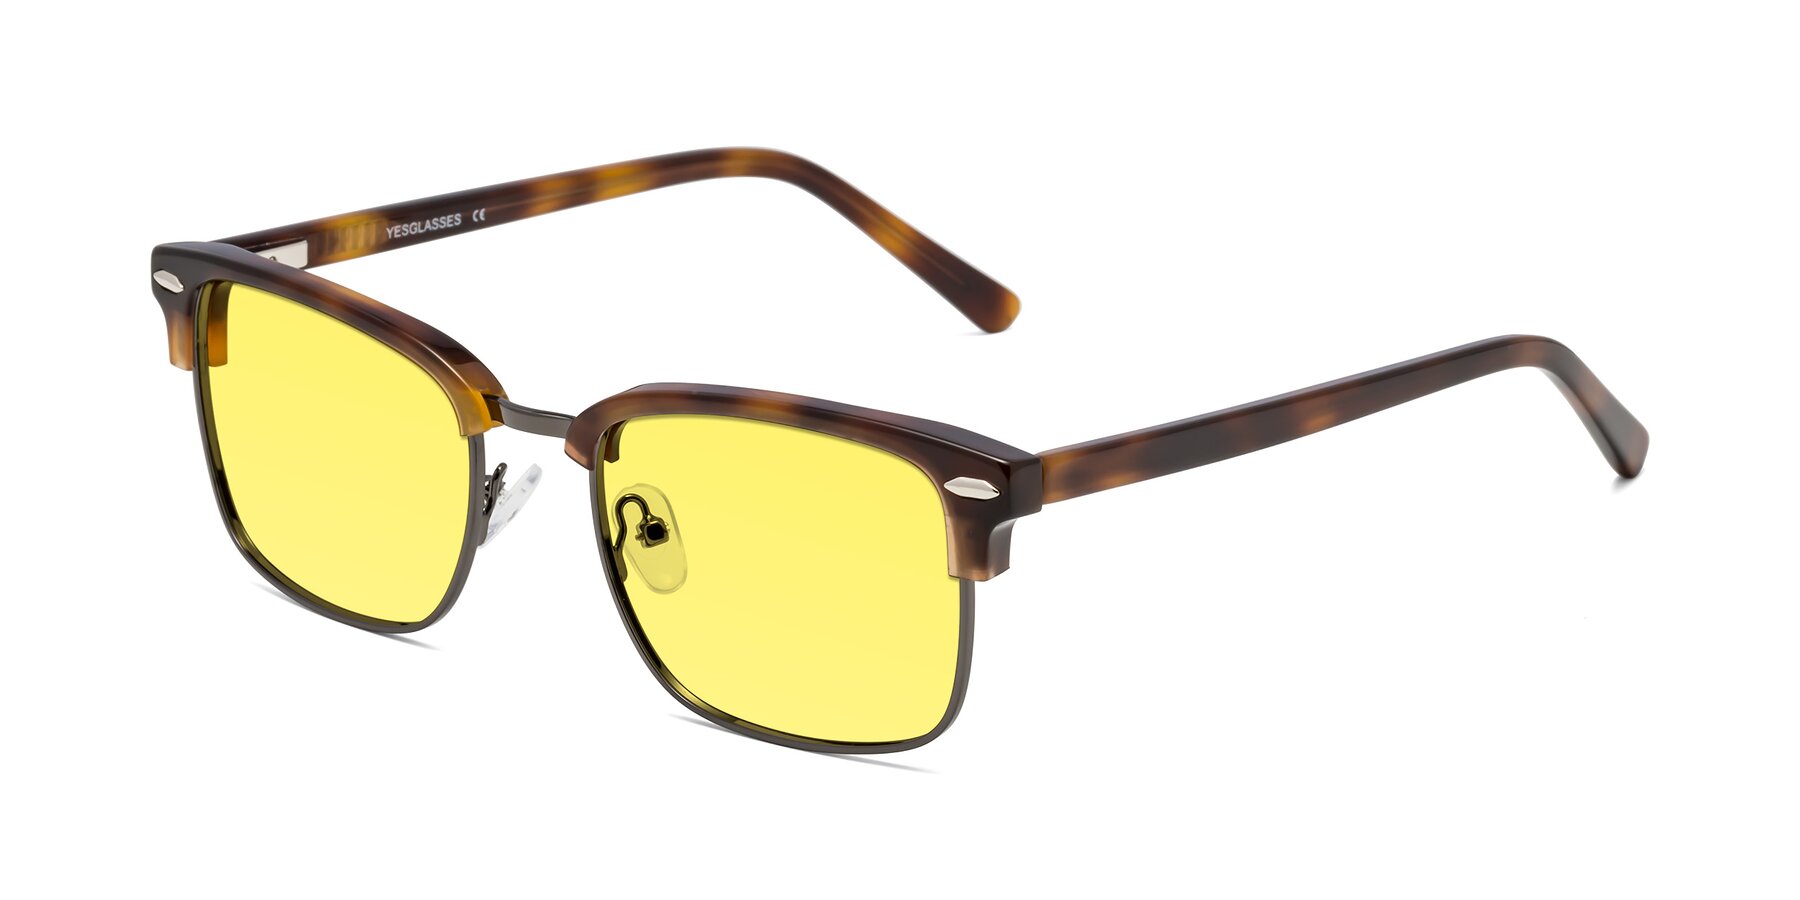 Angle of 17464 in Tortoise/ Gunmetal with Medium Yellow Tinted Lenses